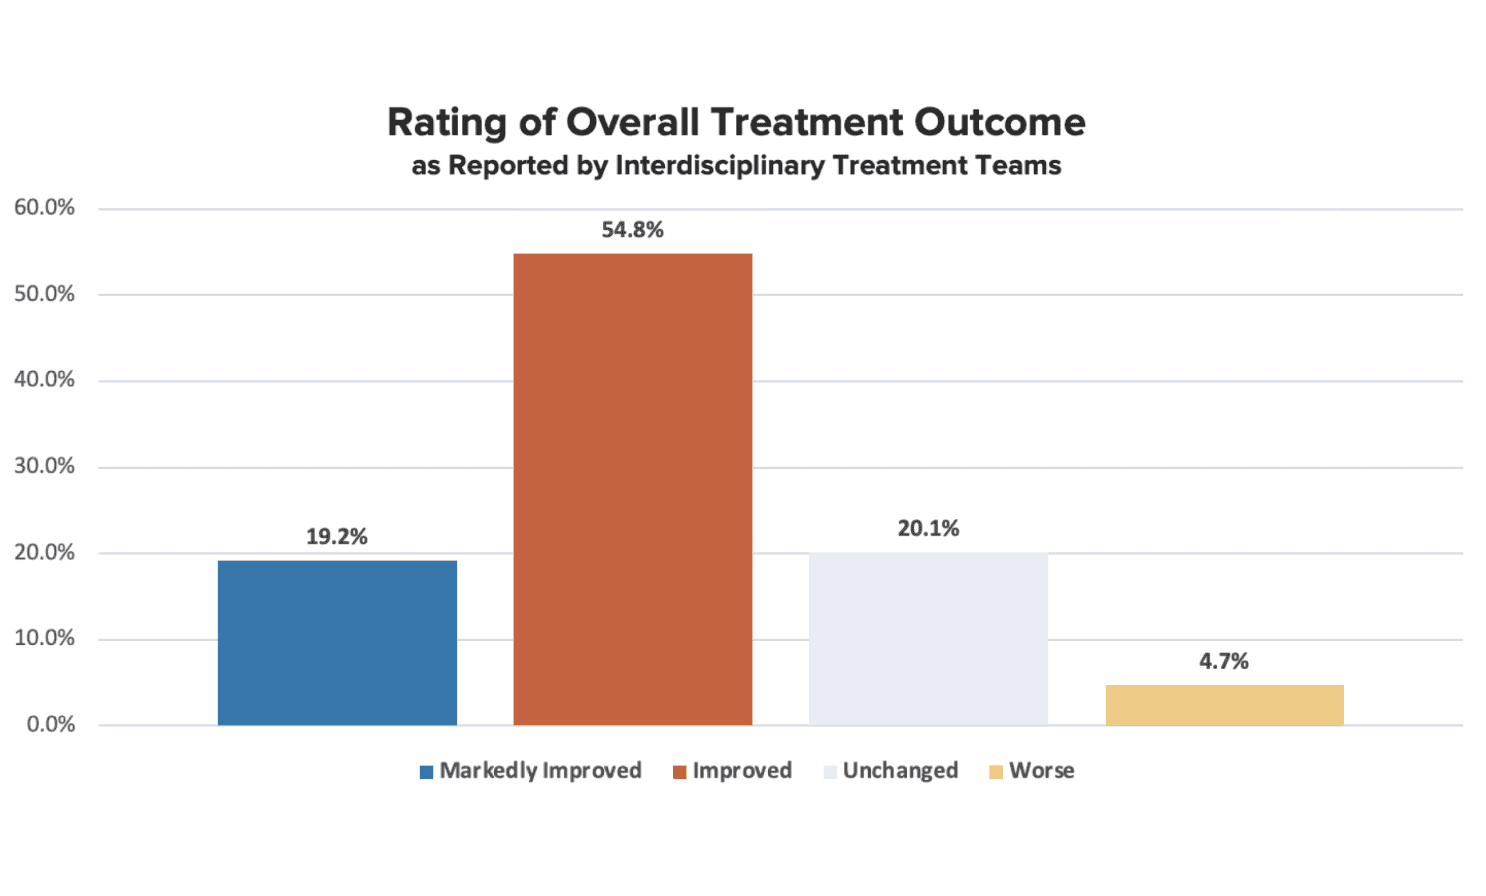 Bar chart rating overall treatment outcome of Austen Riggs patients, with 54.8 percent showing improved